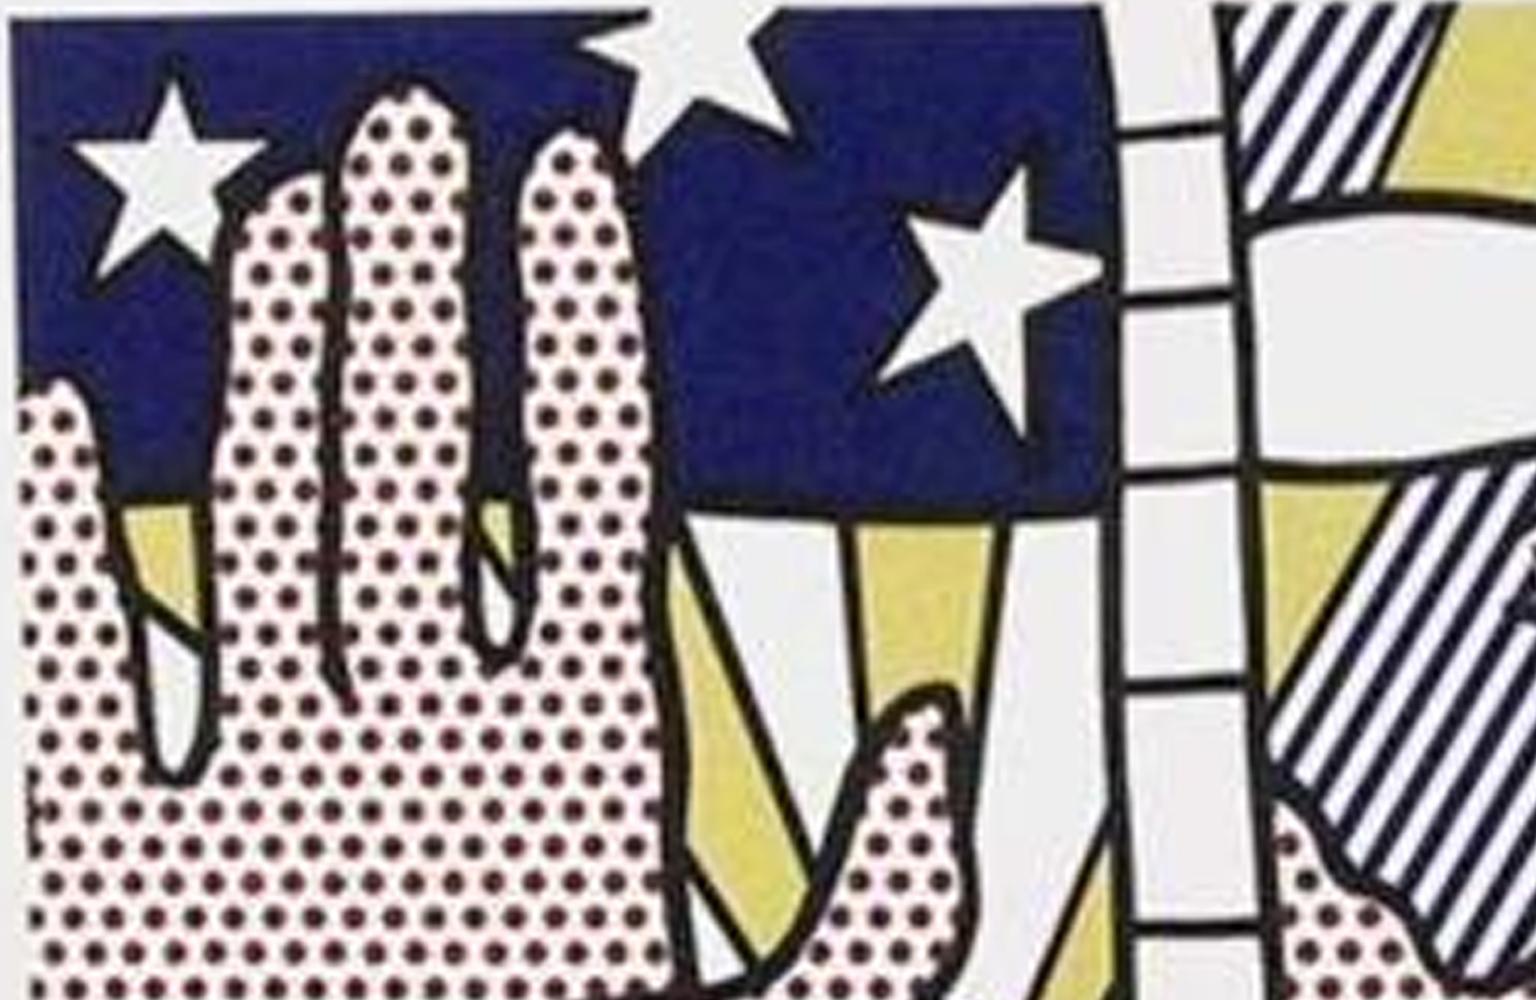 Roy Lichtenstein Serigraph Hand Signed Inaugural Print 1977 ed. of 100 framed For Sale 1